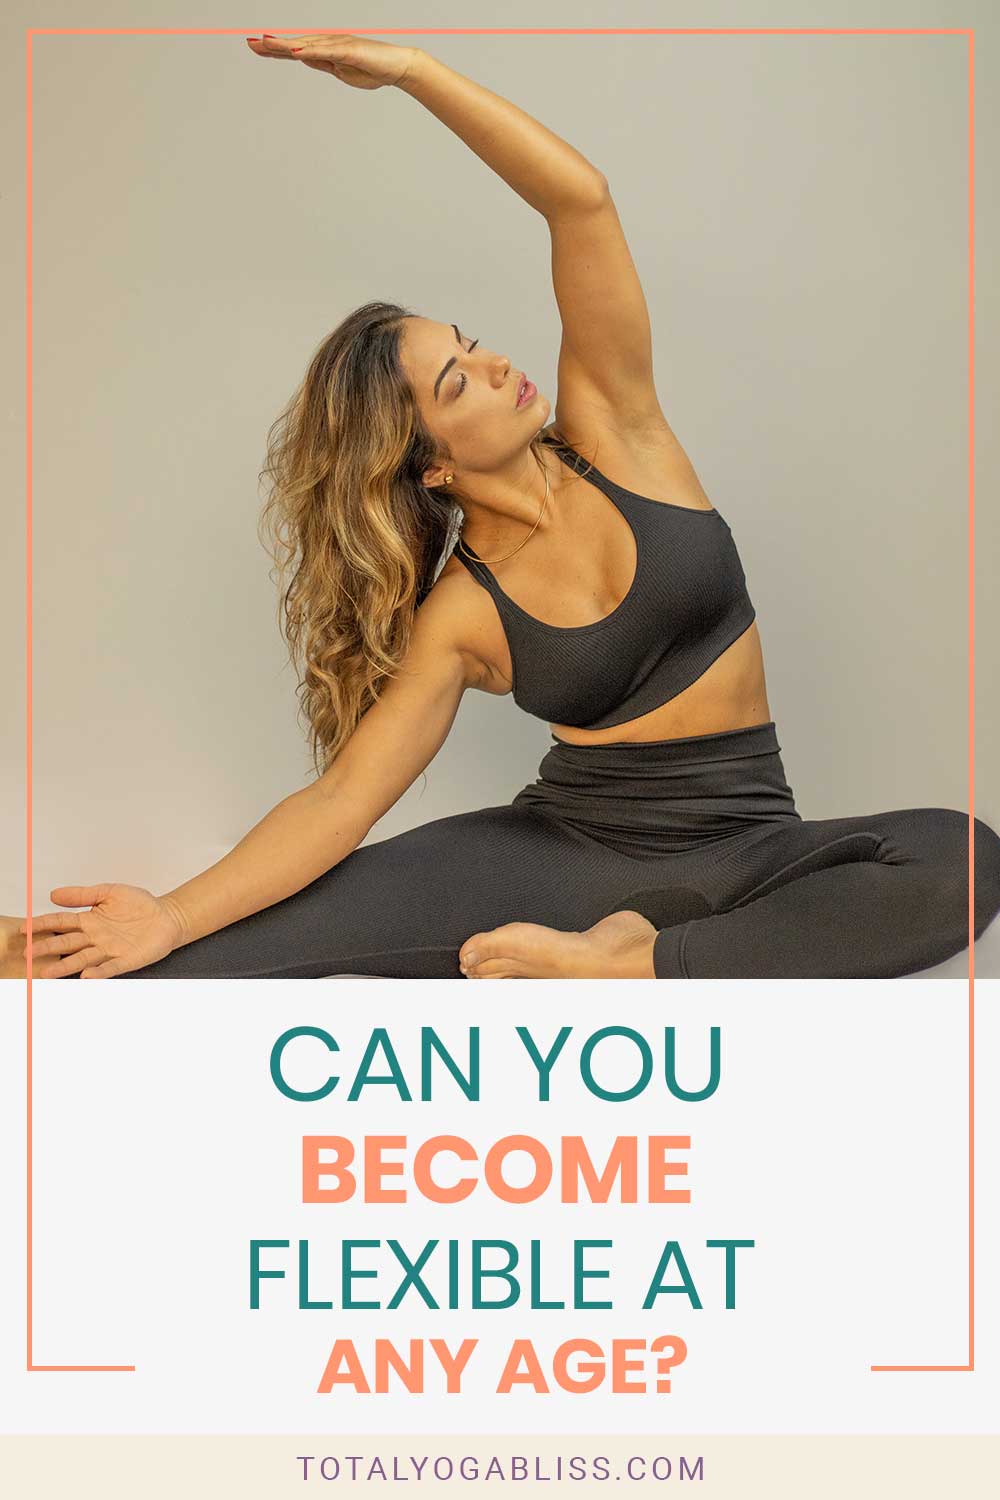 Can You Become Flexible At Any Age?